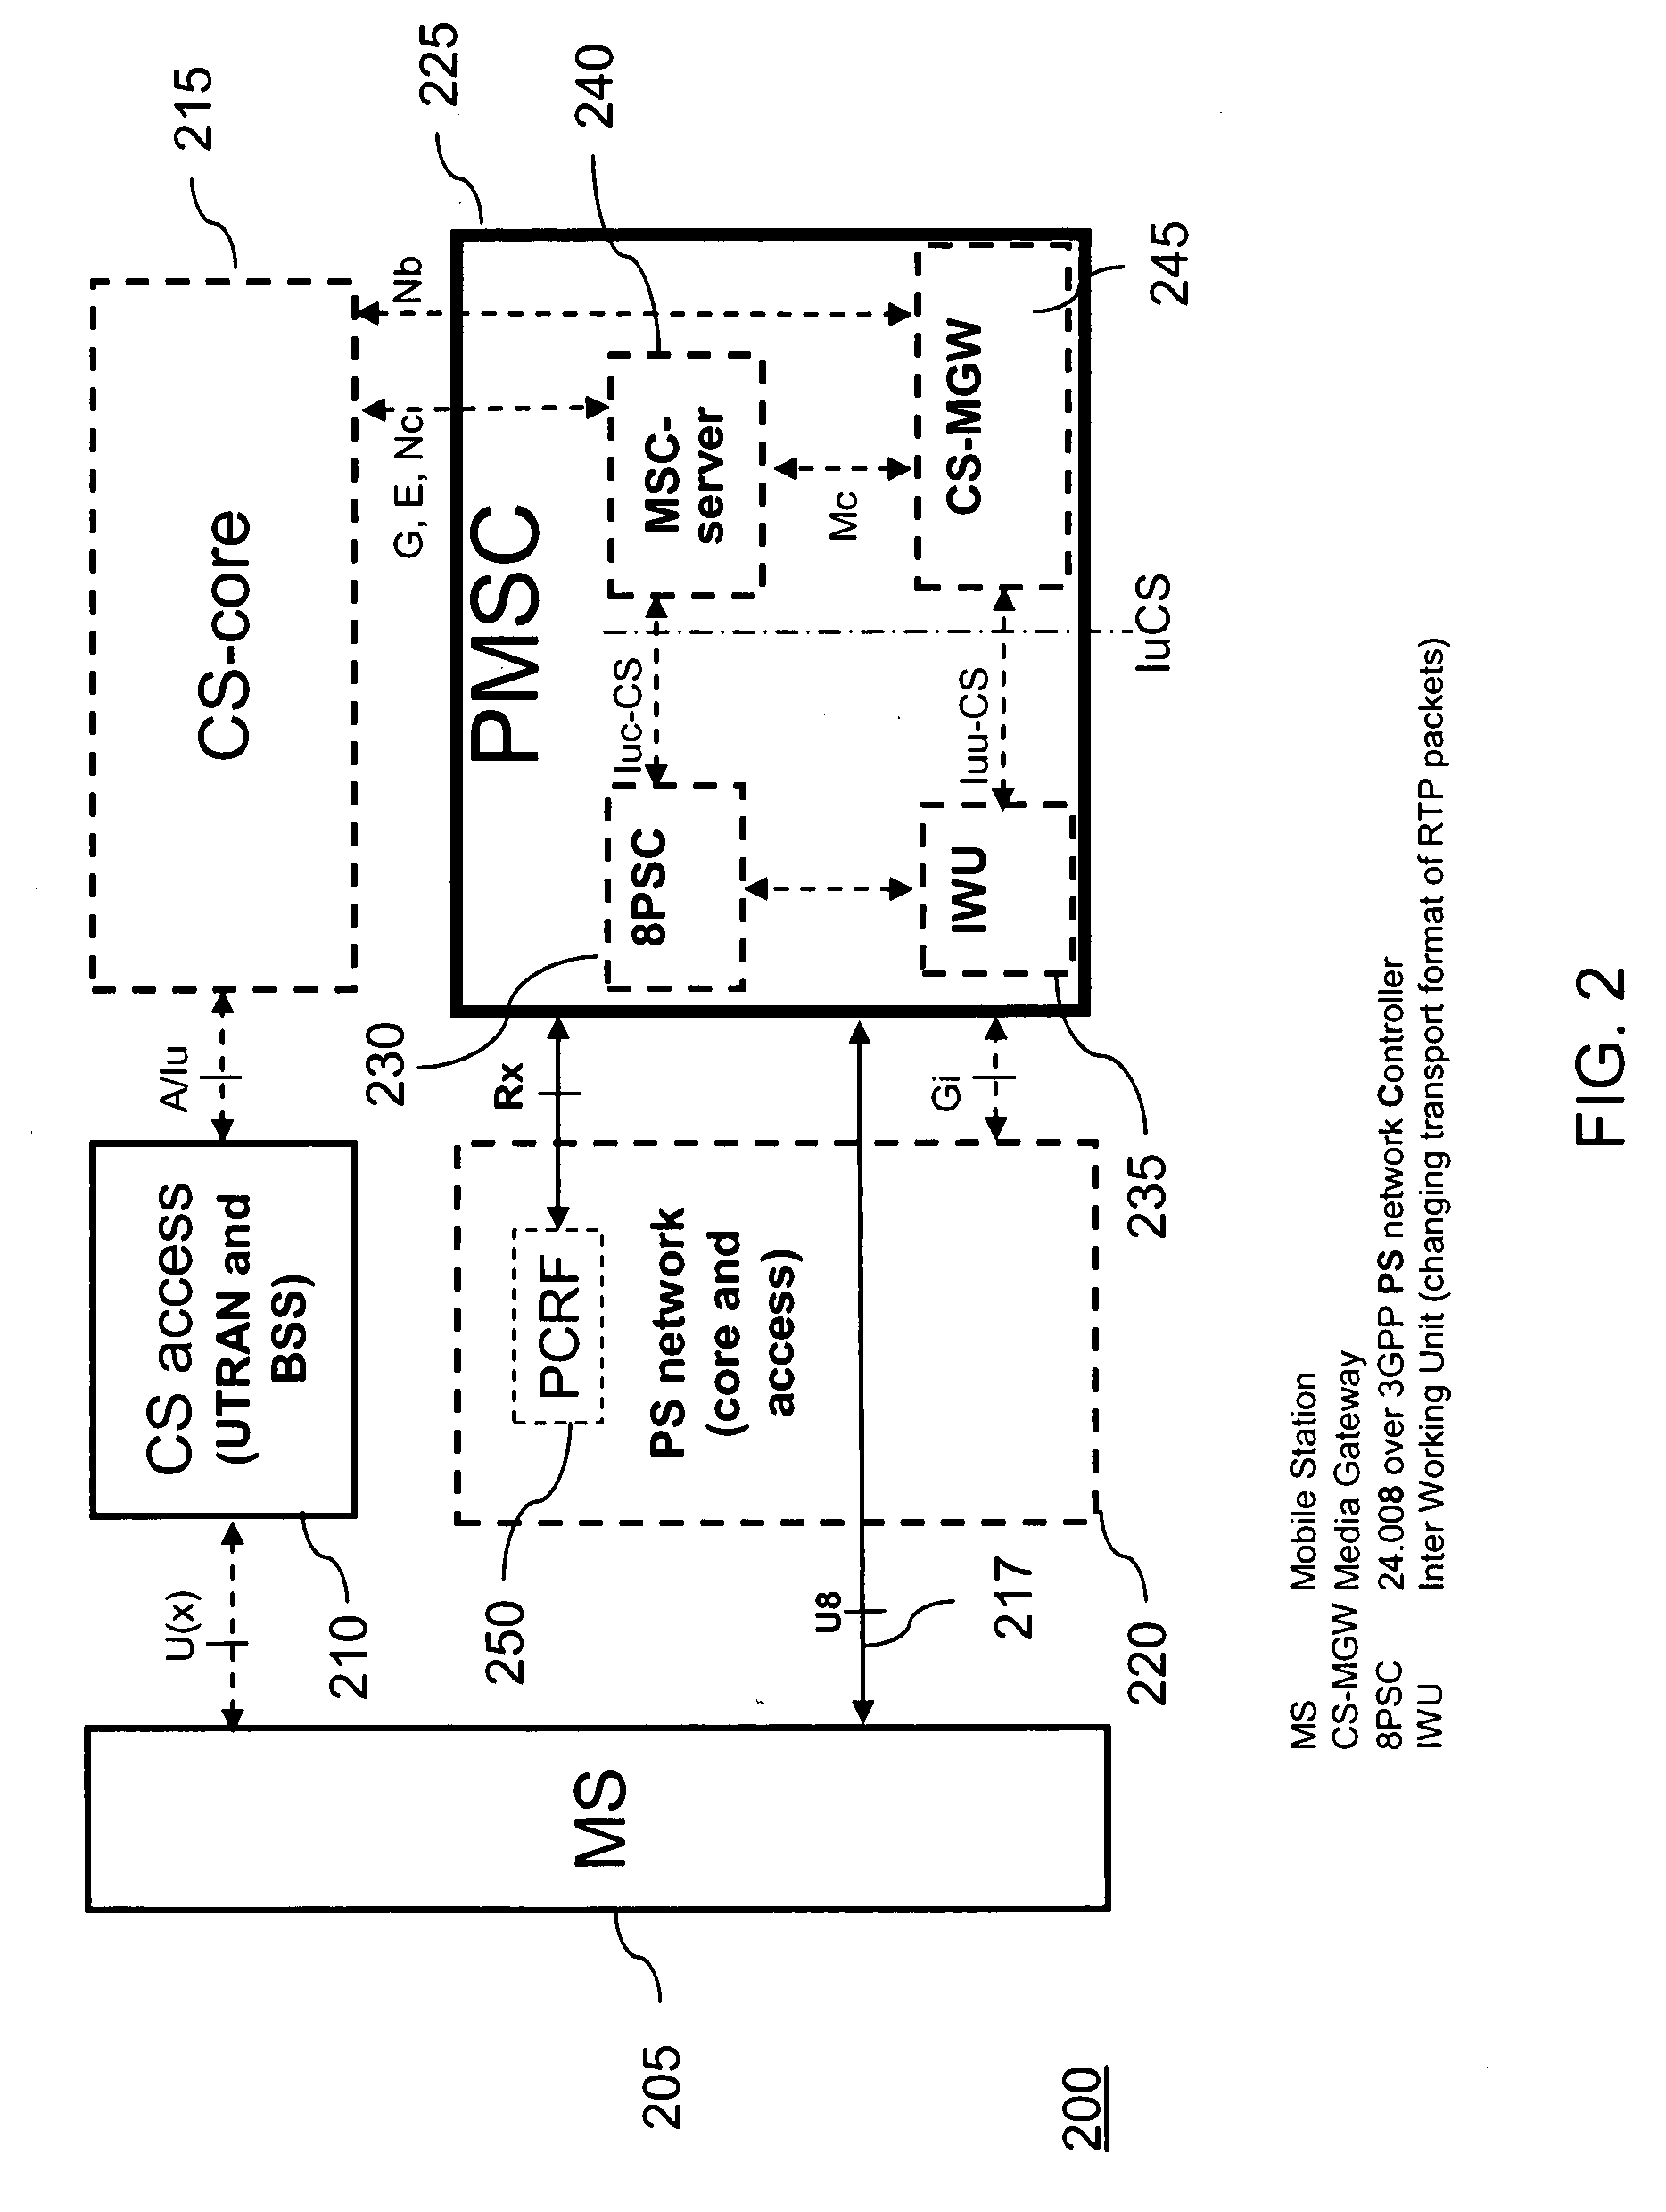 Method and apparatus for providing circuit switched domain services over a packet switched network